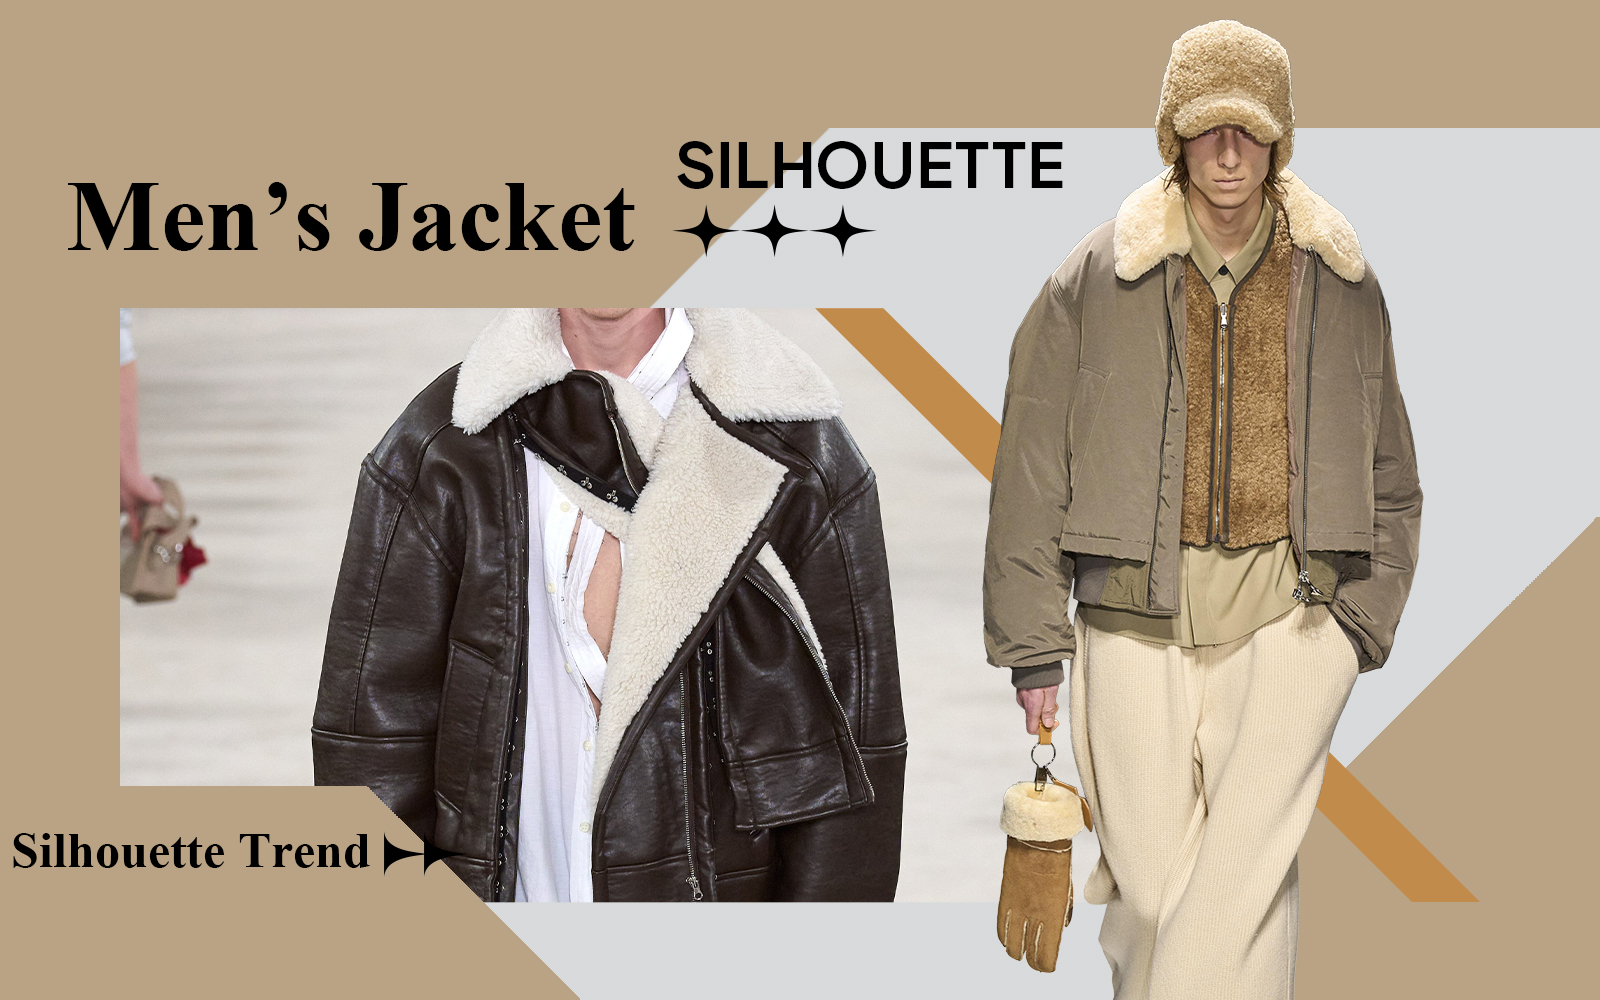 Urban Commuting -- The Silhouette Trend for Men's Jacket